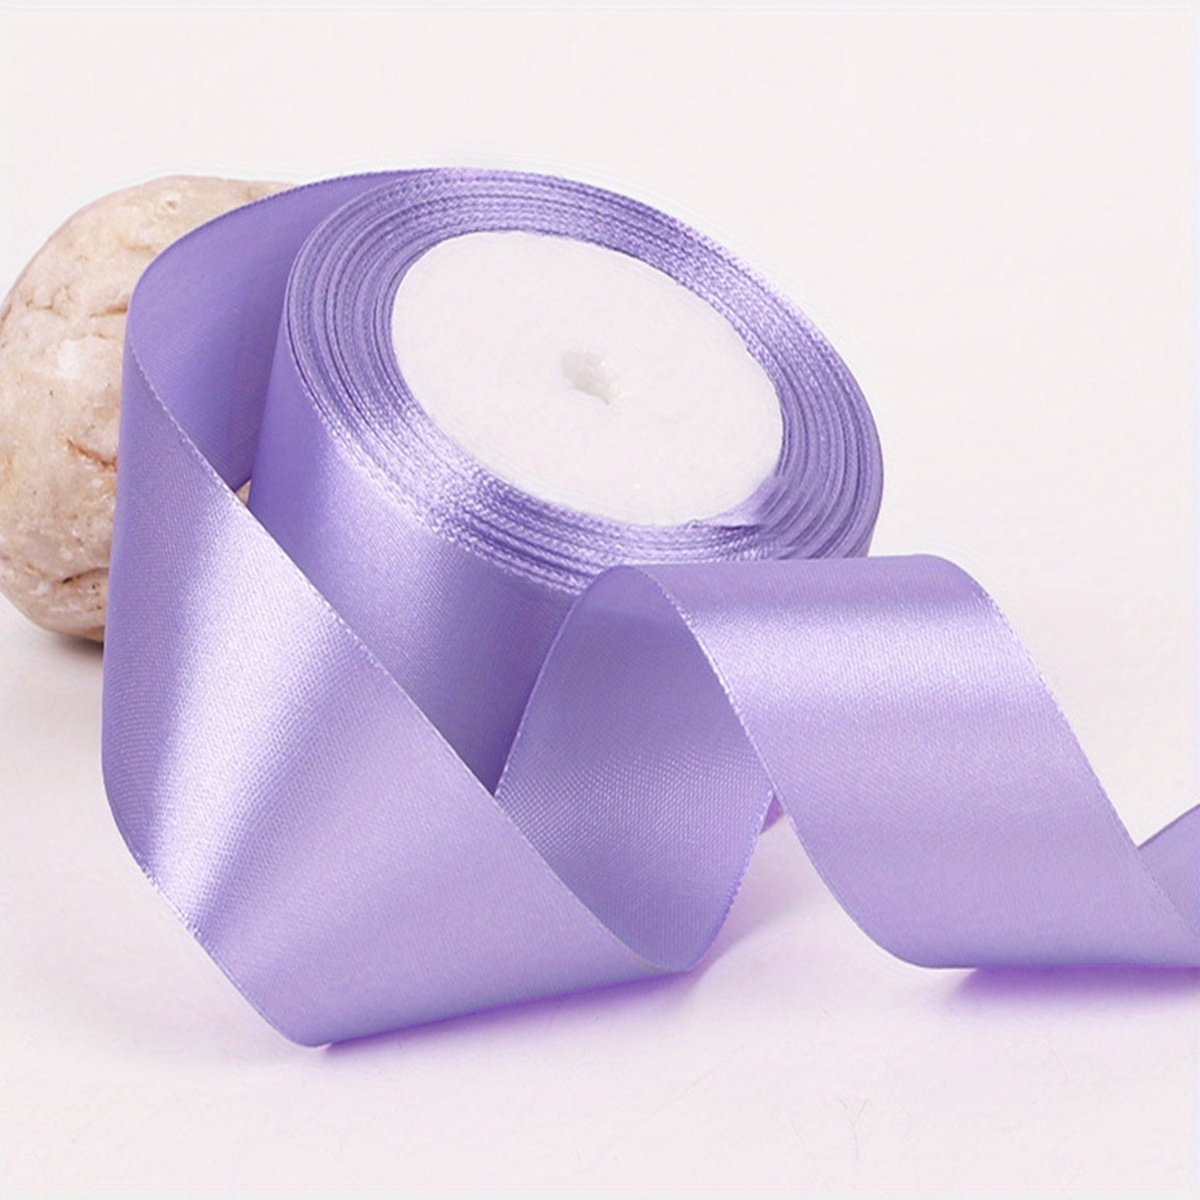  Ribbon 1 inch Light Lilac Ribbons for Crafts Gift